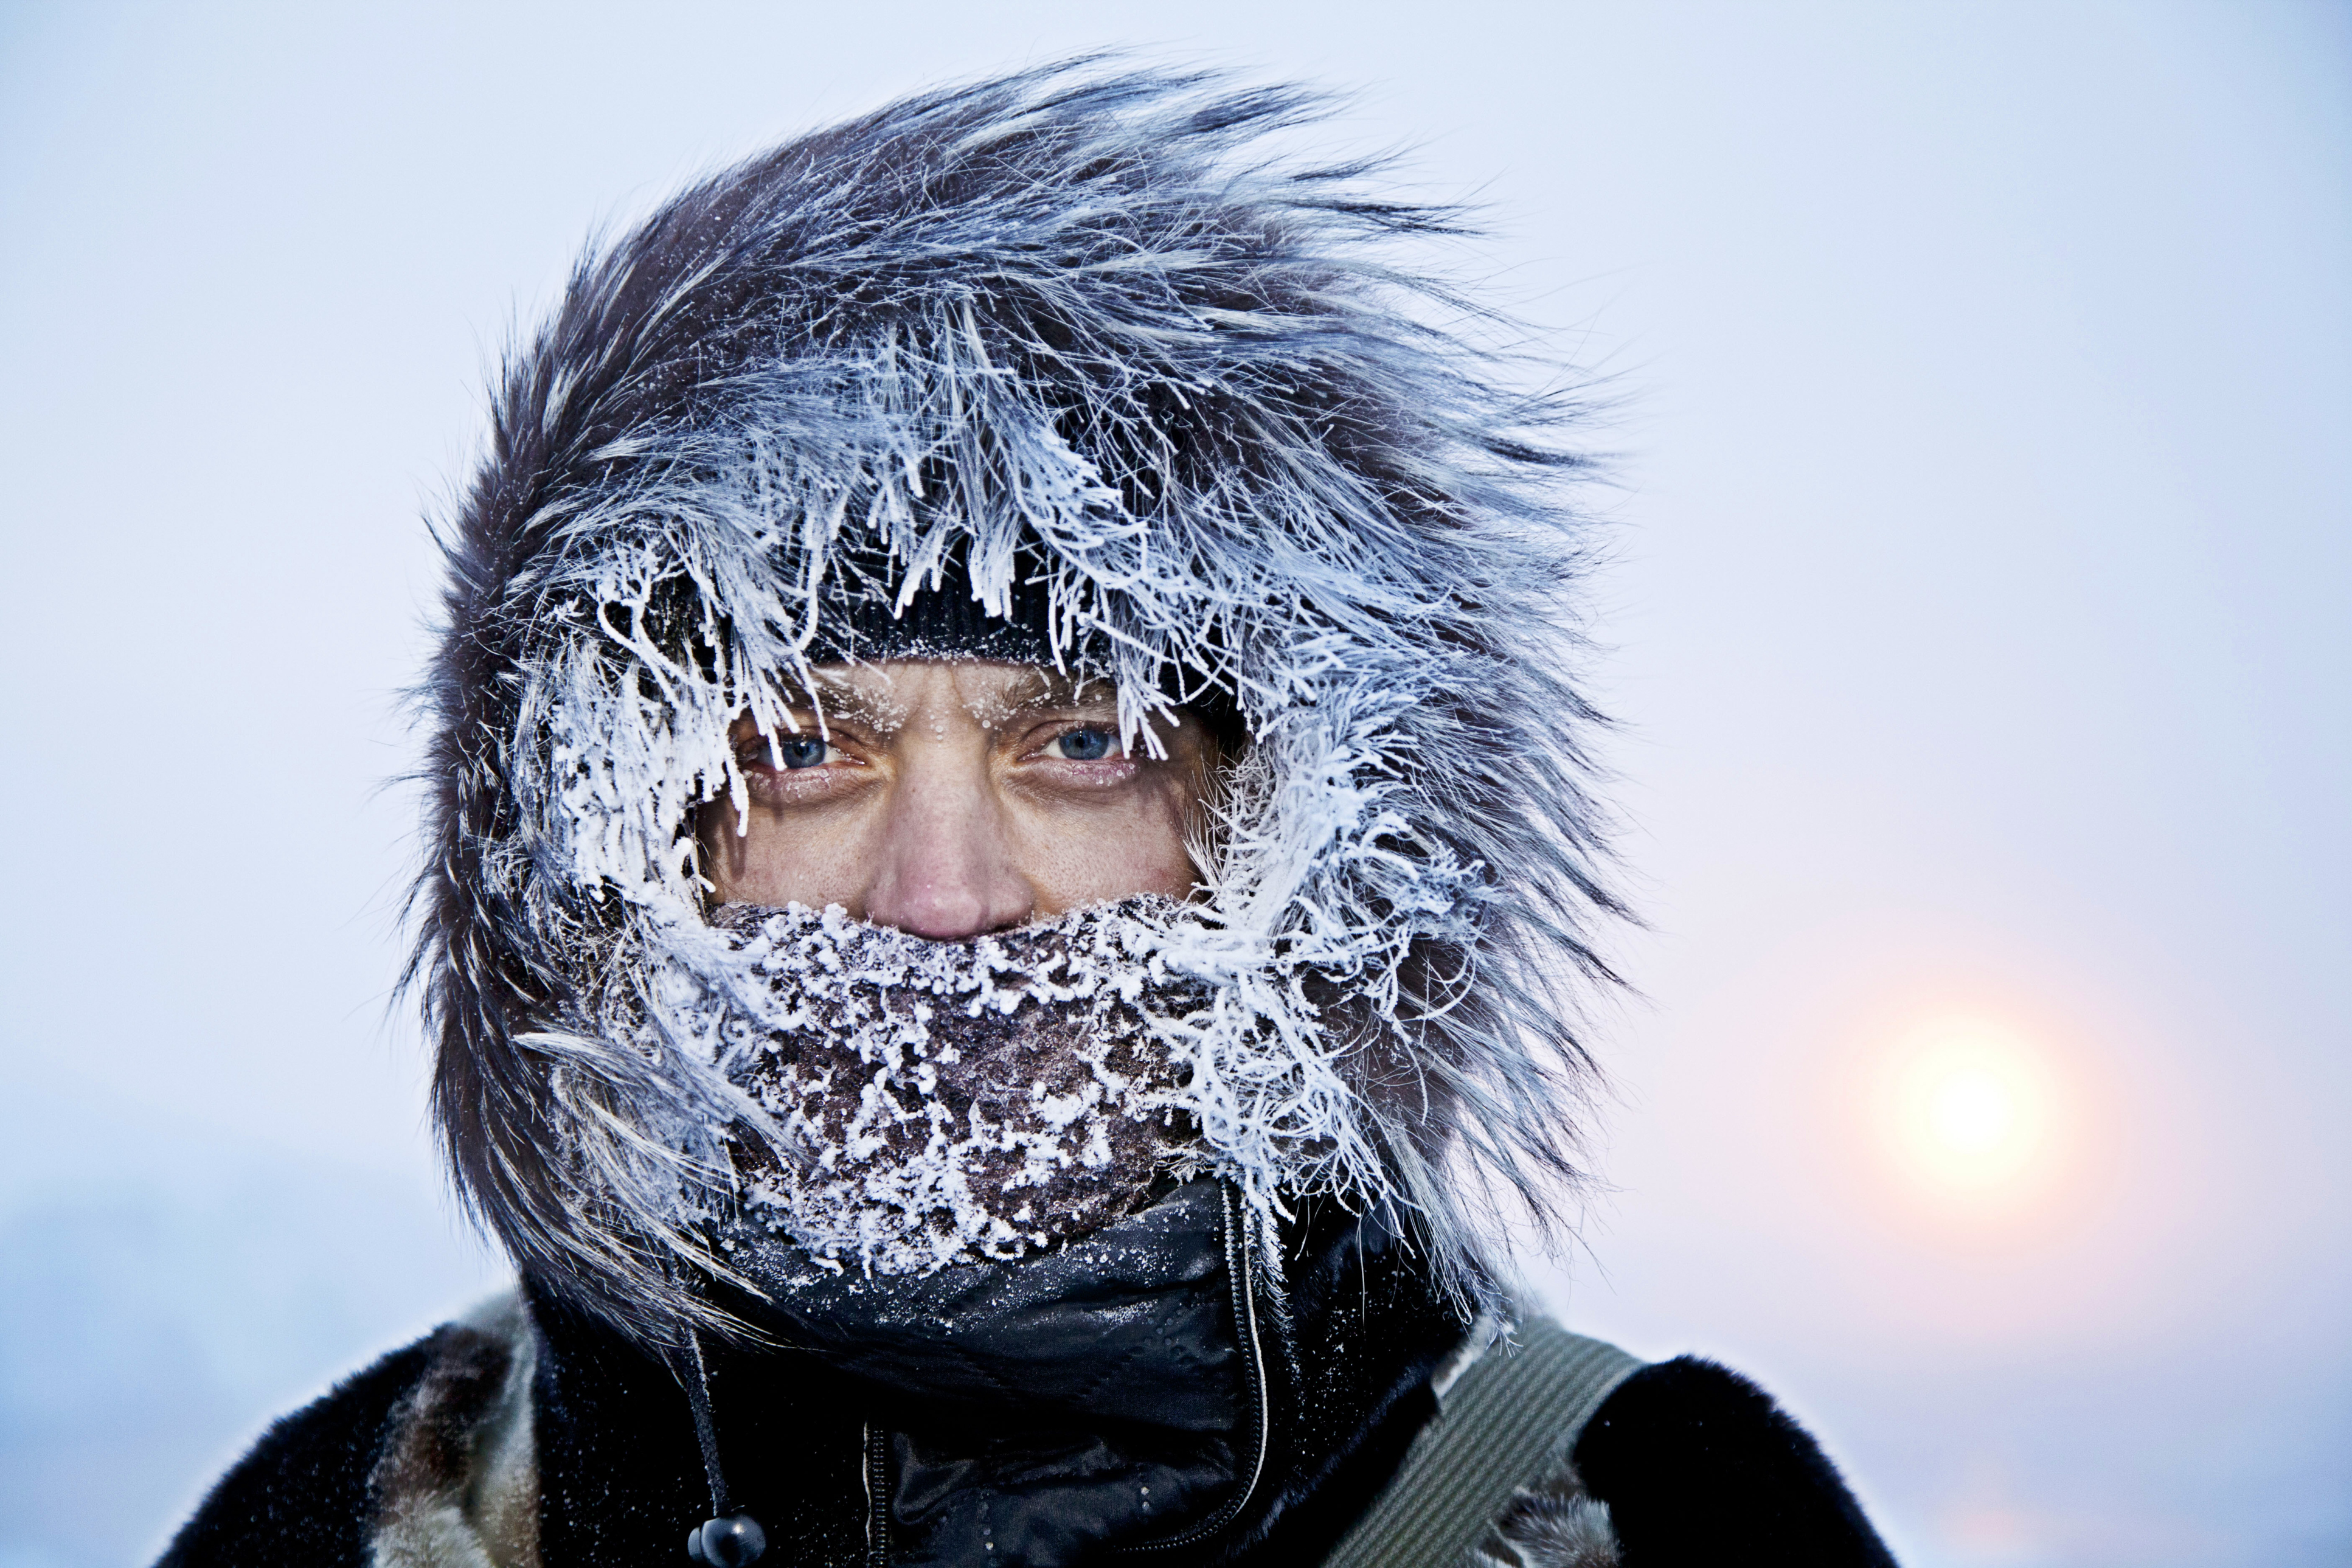 Weather Forecast: 7 Reasons to Love This Freezing Weather